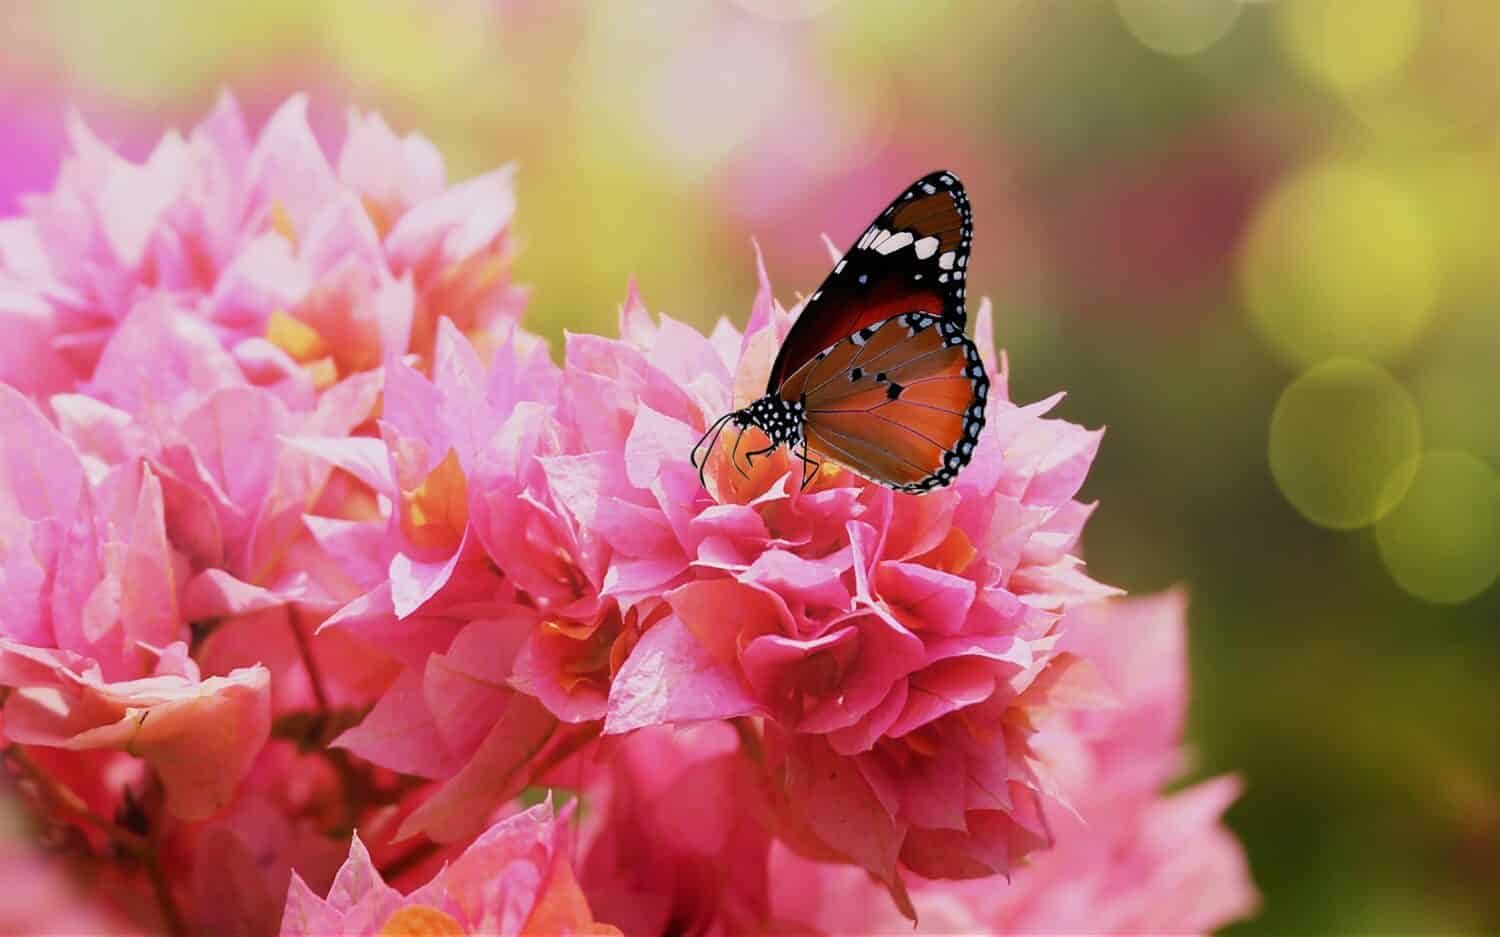 Plain Tiger or African Queen butterfly (Danaus chrysippus) on pink bougainvillea flowers. What are the characteristics of Plain Tiger butterfly?The Plain Tiger ( Danaus chrysippus ) is a medium-sized